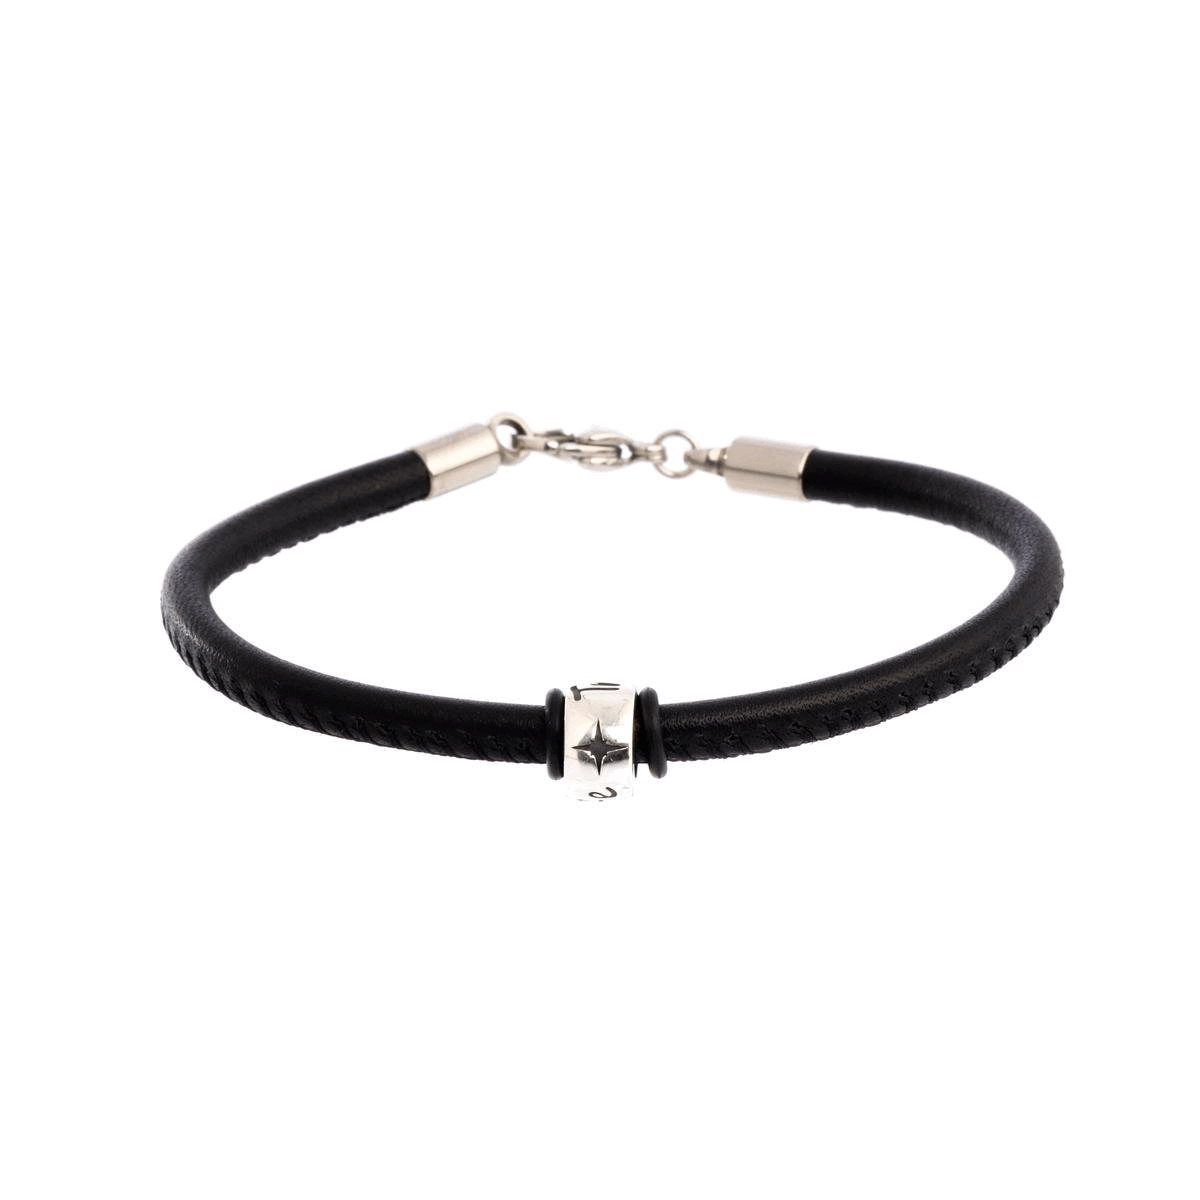 Travel Safe Silver & Italian Stitched Leather Bracelet - alternative travel gift from Off The Map Jewellery Brighton